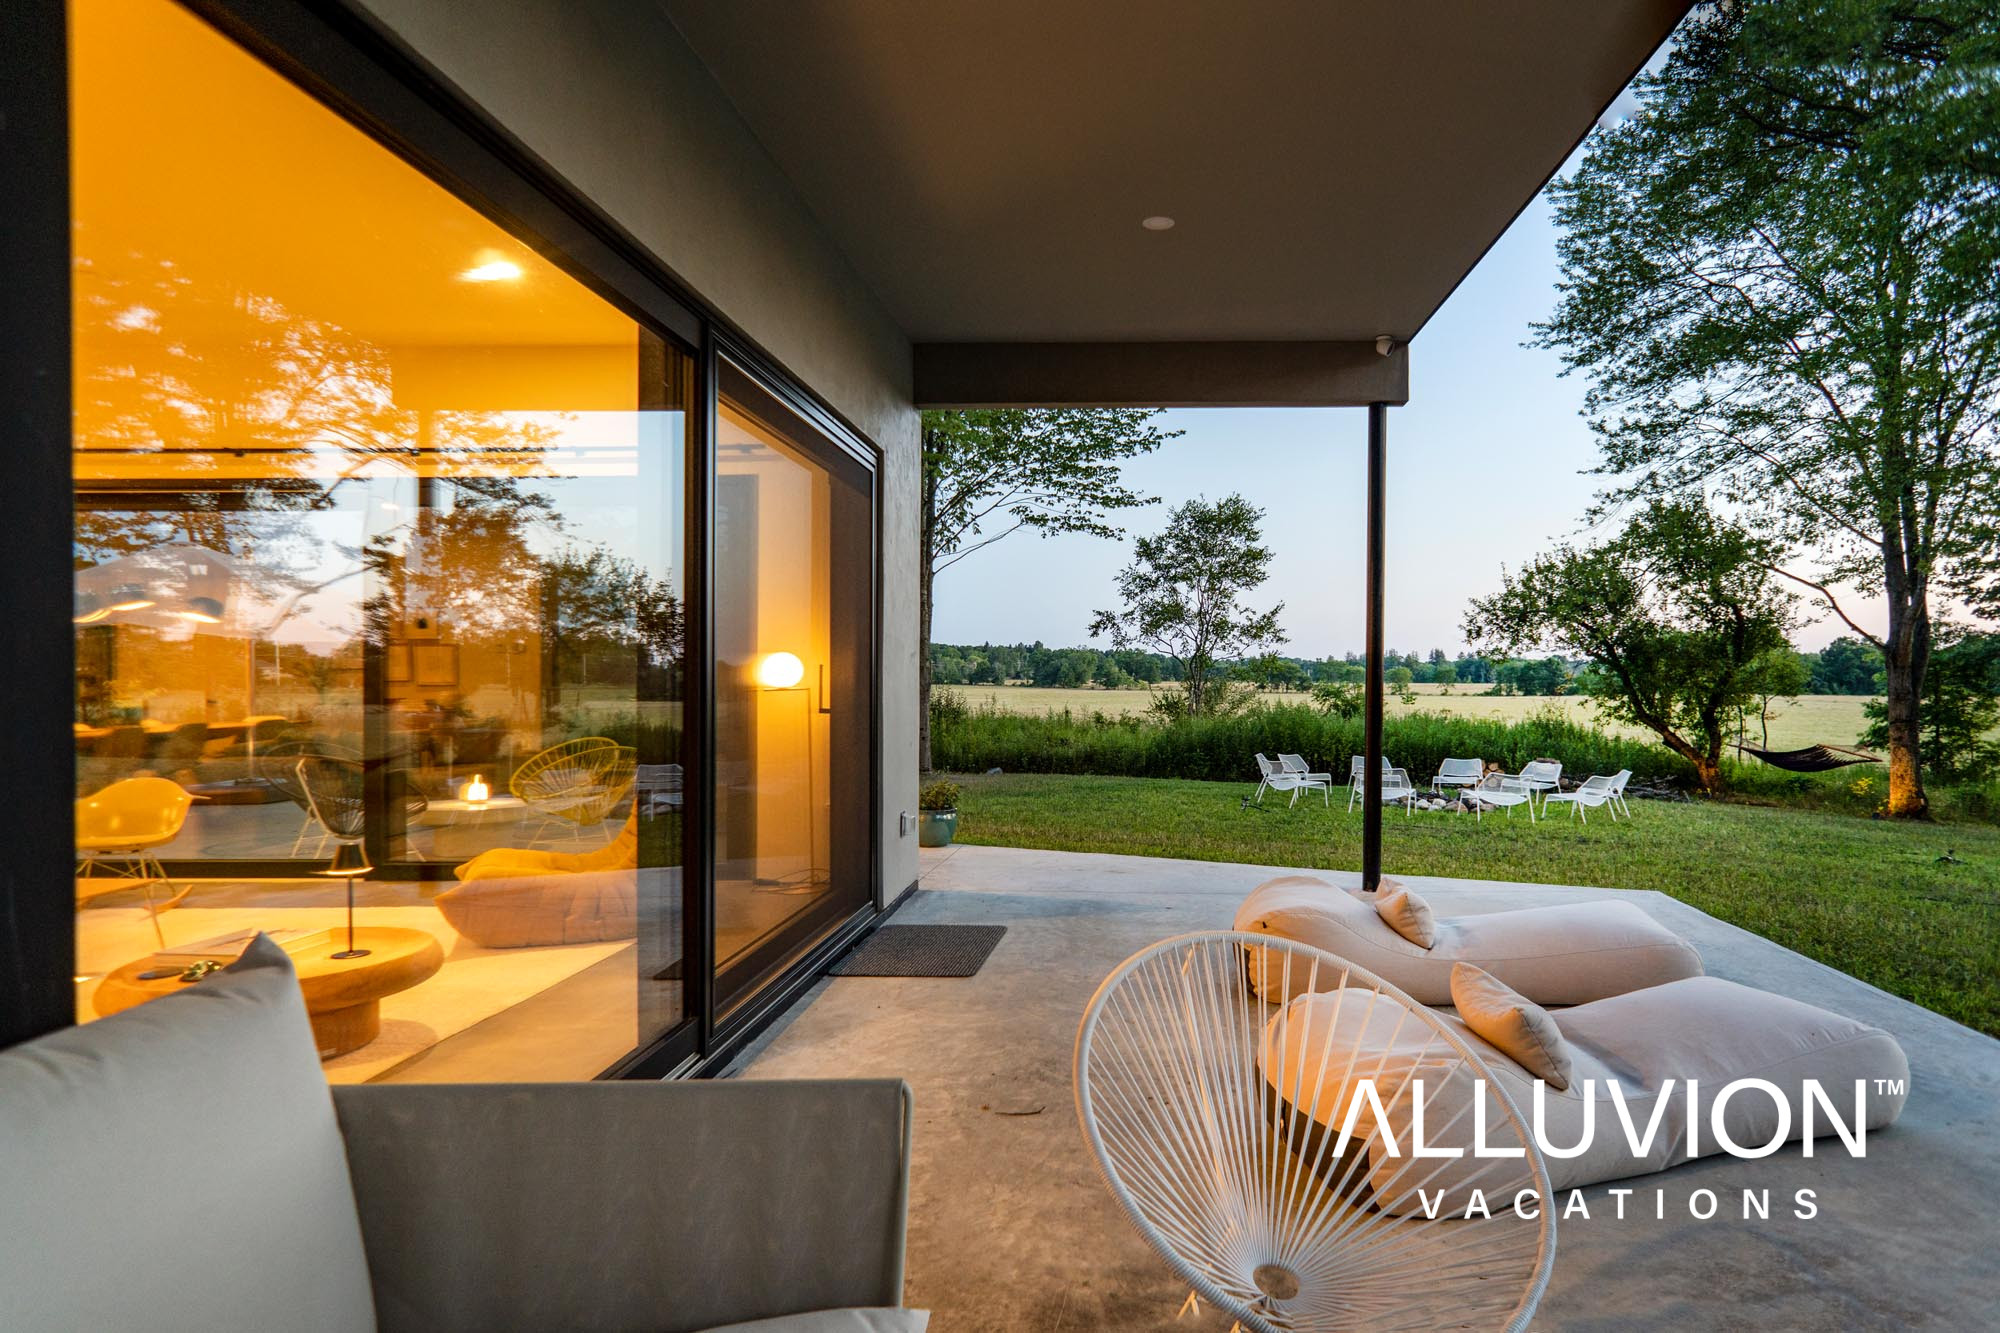 Experience the Magic of Hudson Valley with Alluvion Vacations – Luxury Airbnb Villa in the heart of Hudson Valley Farmland